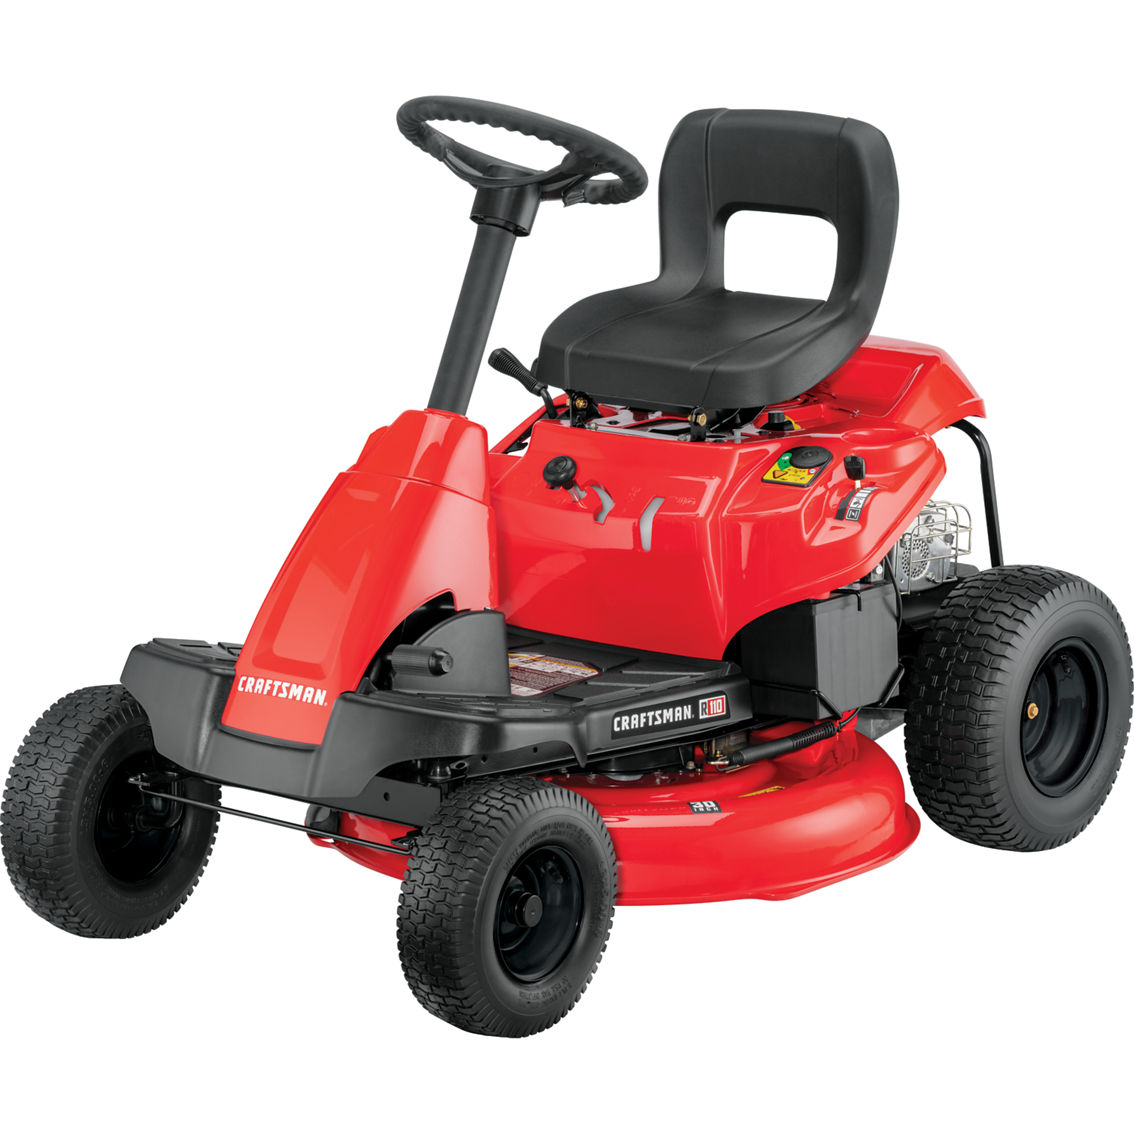 Craftsman 30-in. 10.5 HP Gear Drive Gas Mini Riding Mower - Image 2 of 3